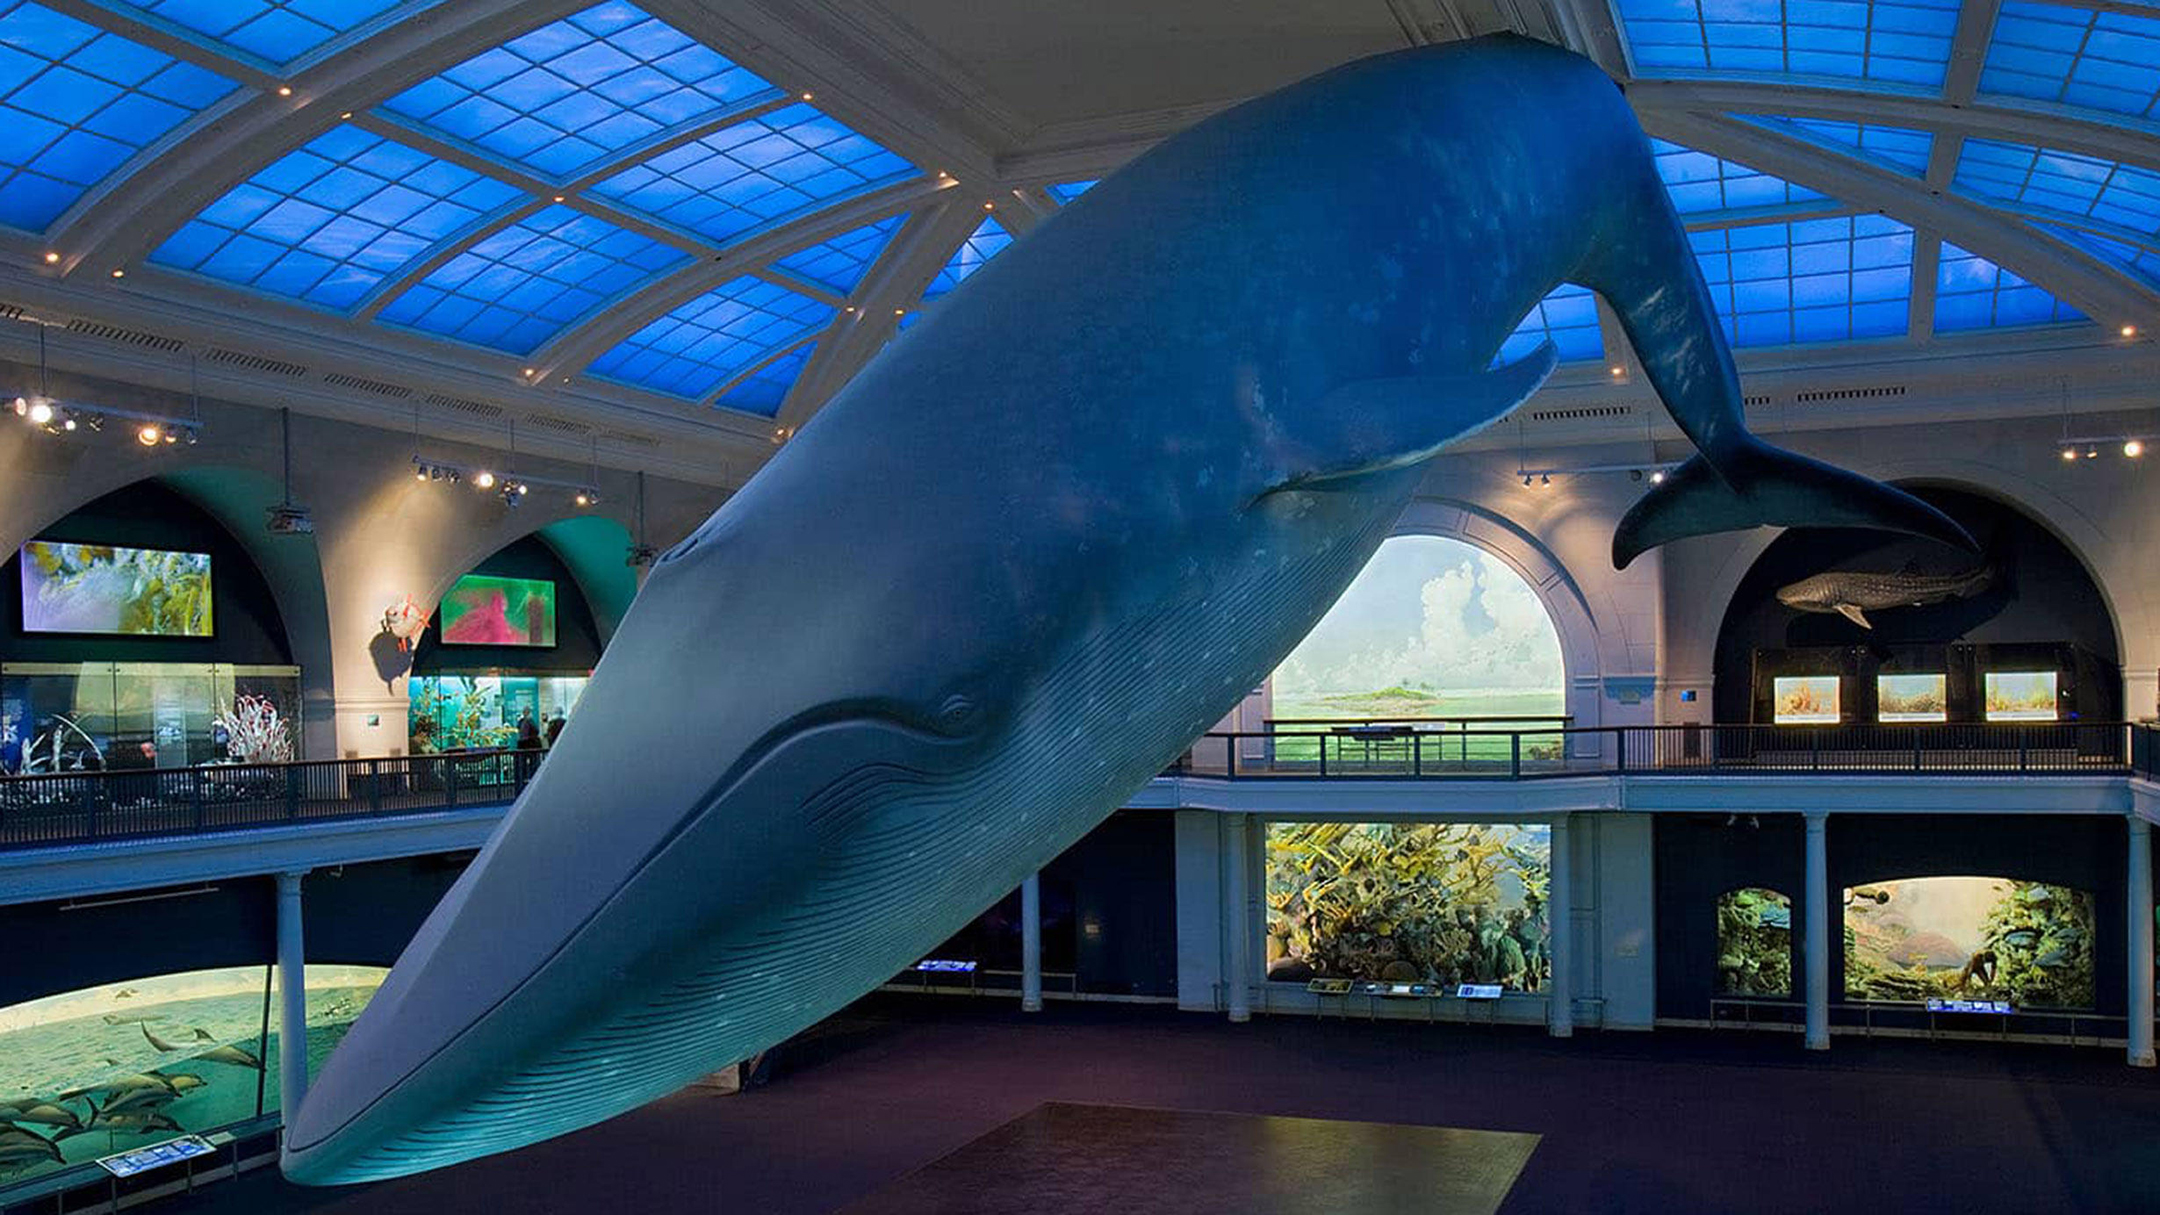 the blue whale model hanging from the ceiling at the american museum of natural history